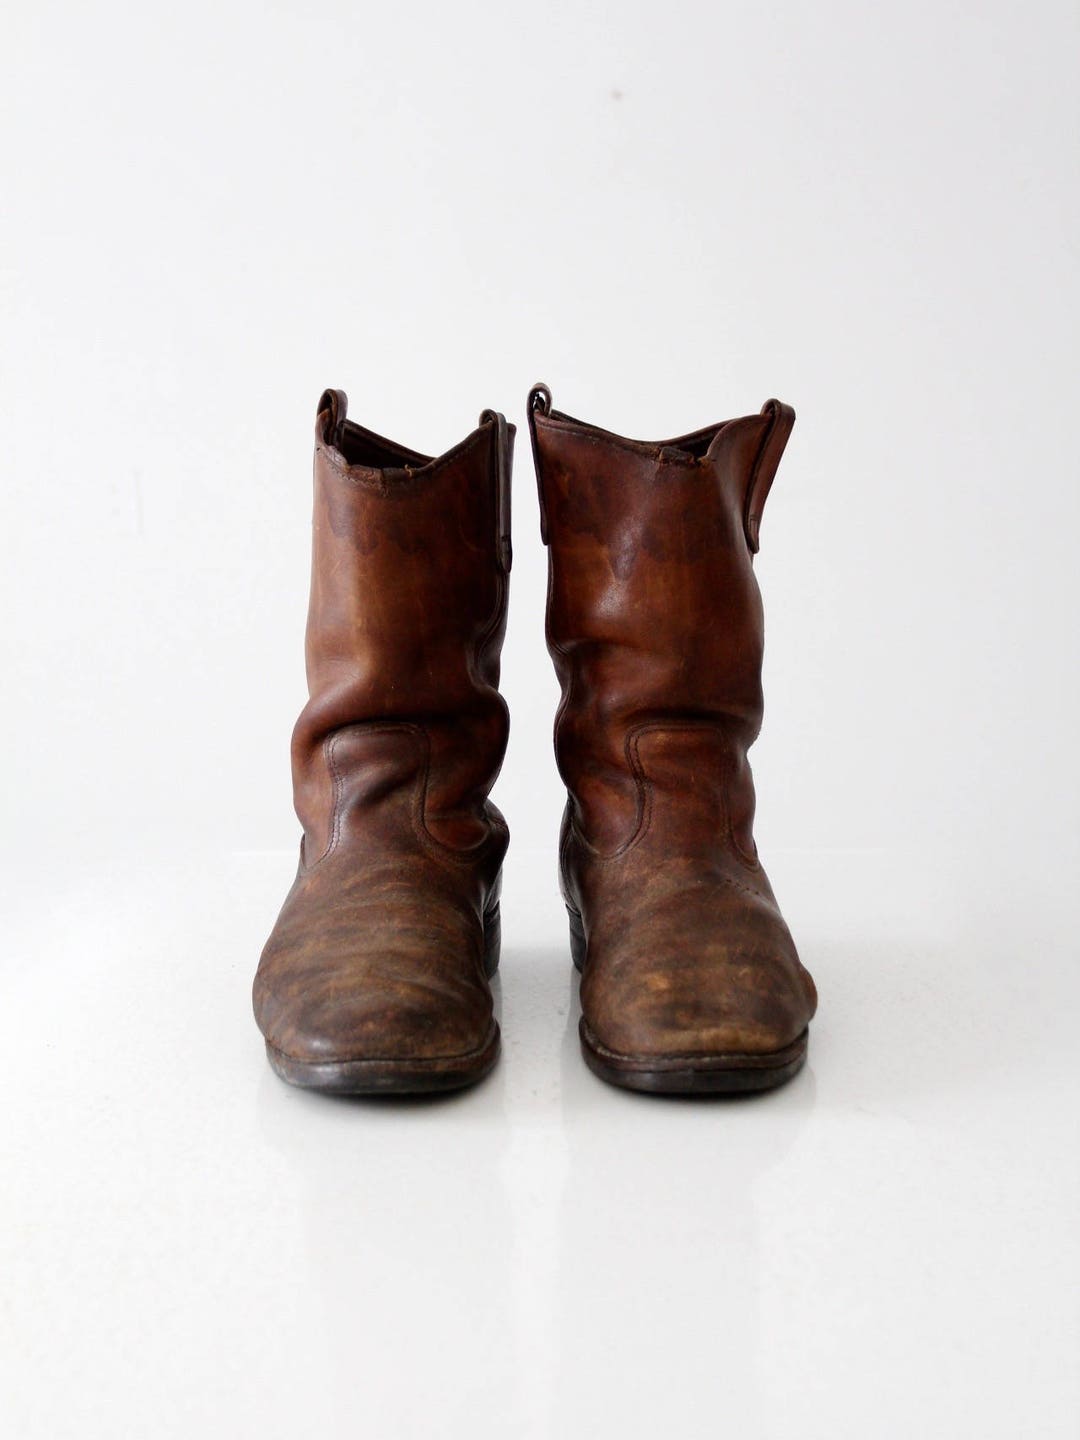 Vintage Red Wing Work Boots, Leather Work Boots - Etsy